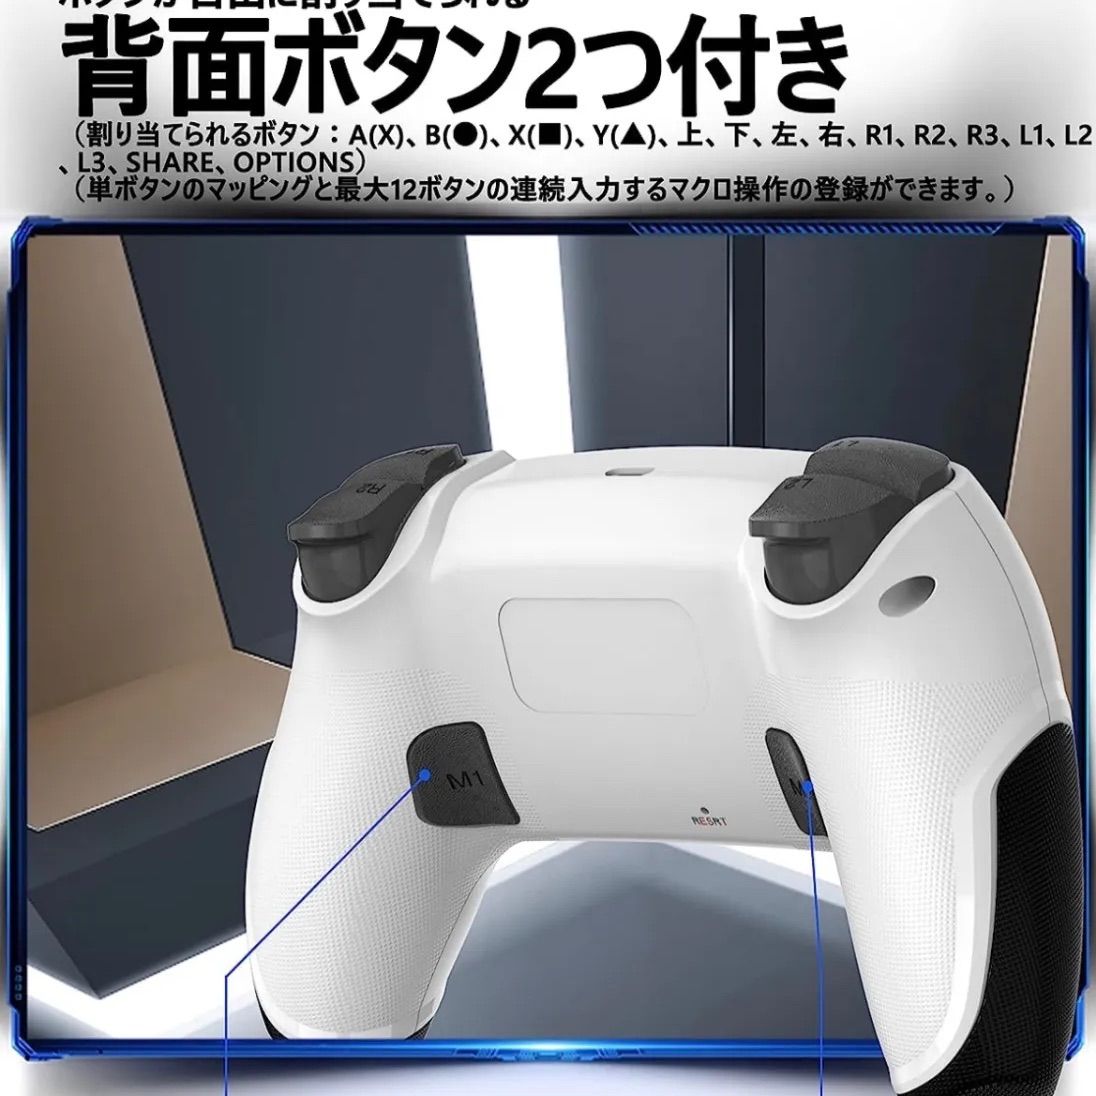 COWBOX PS4 コントローラー 【モデル名：P06 2023年版】 対応機種【PS3/4/5（PS4ゲームのみ対応）、Switch、Switch lite/Switch OLED、iphone/ipad(ios13~16)、ANDROID - メルカリShops